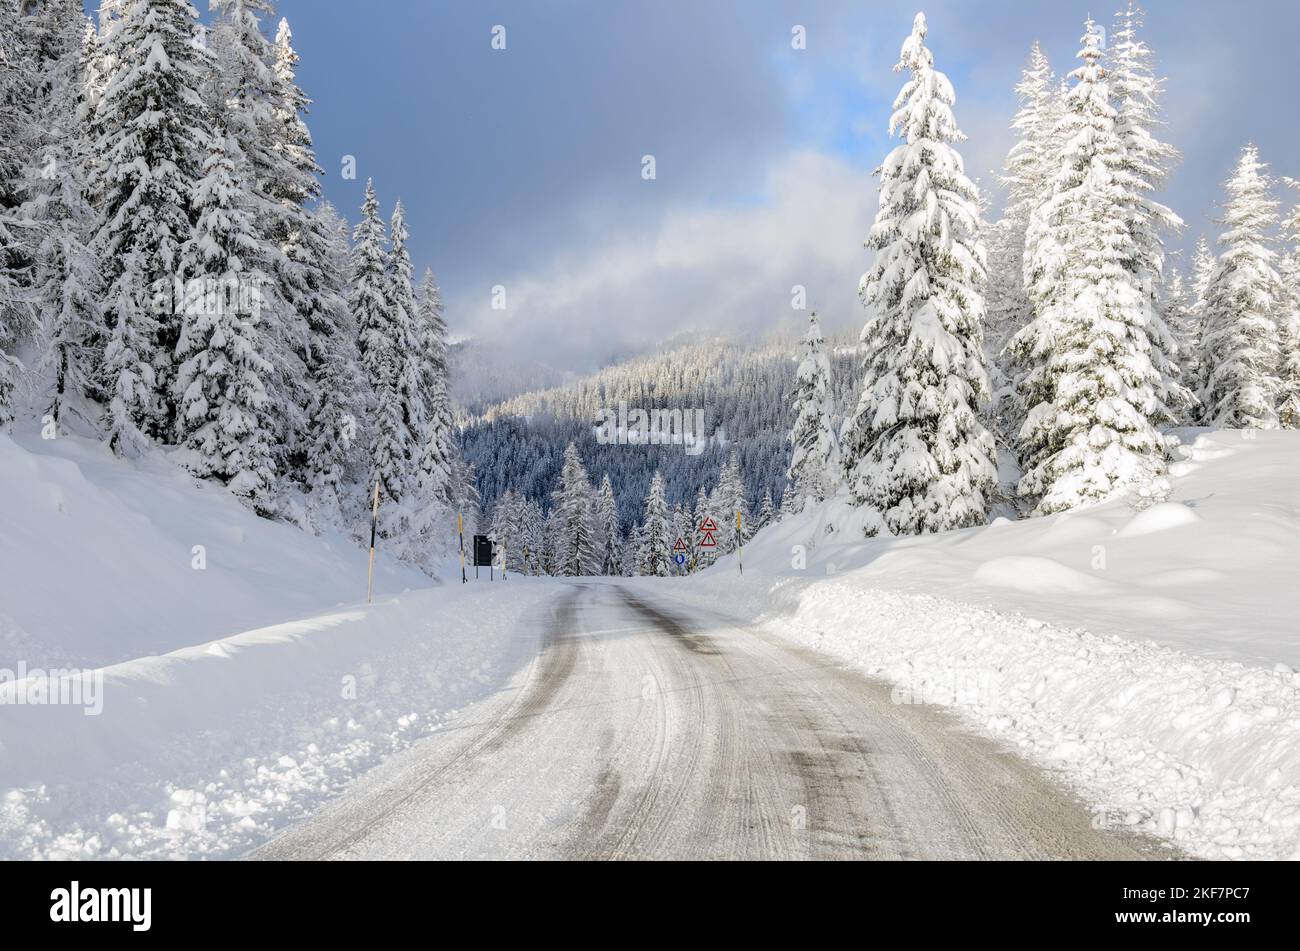 Deserted icy road through a snowy forest on a sunny winter day Stock Photo